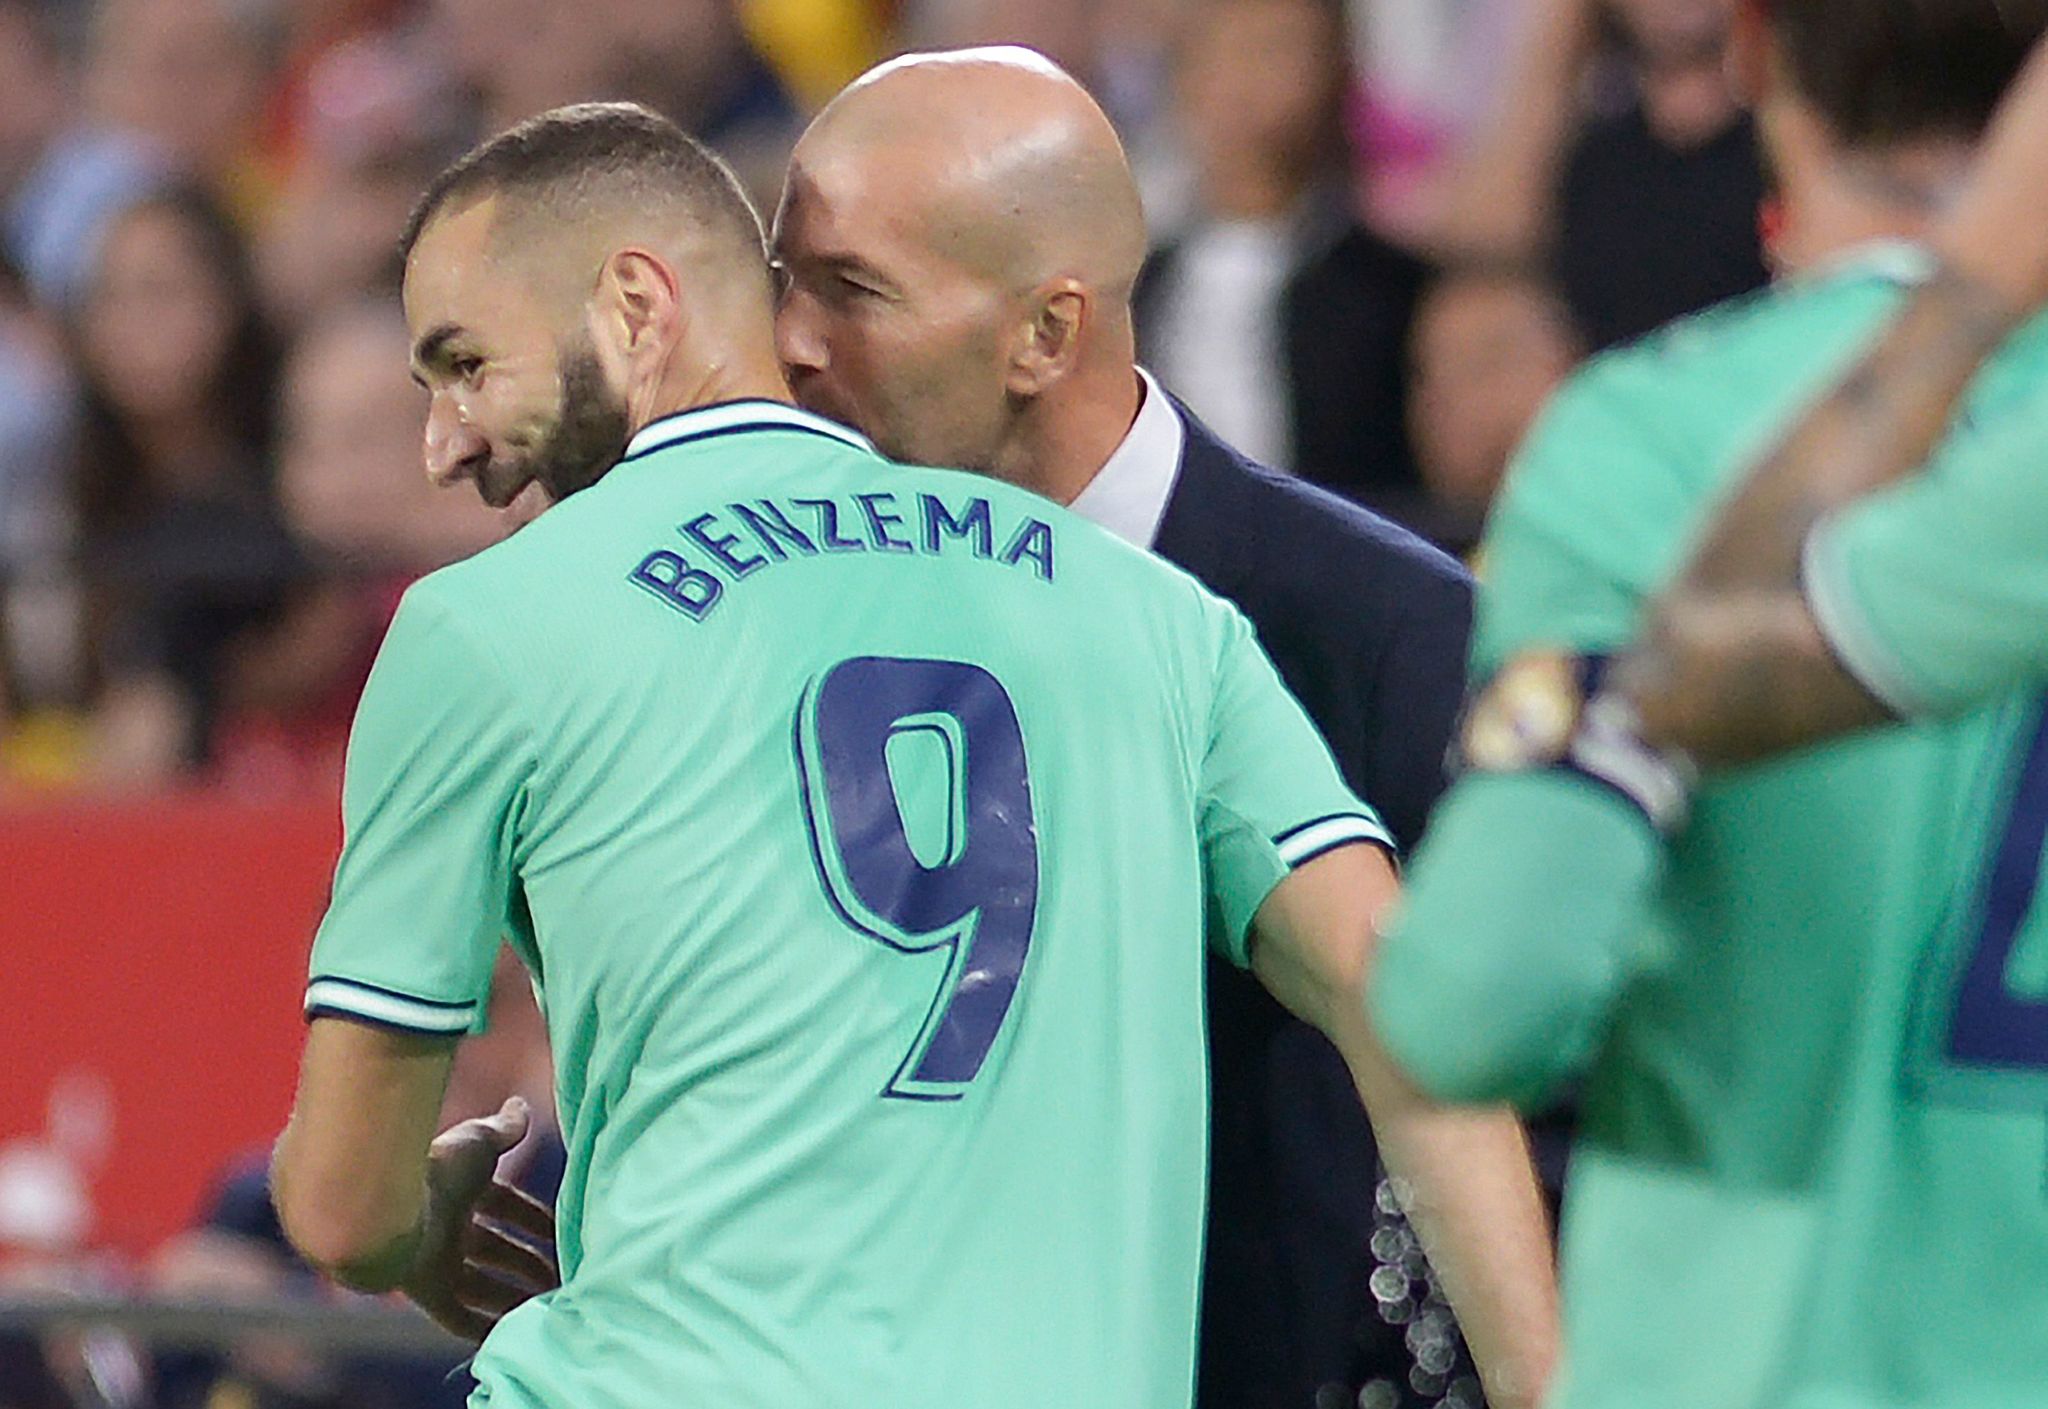 Real Madrids French coach Zinedine Zidane (R) congratulates Real Madrids French forward Karim <HIT>Benzema</HIT> for his goal during the Spanish league football match between Sevilla FC and Real Madrid CF at the Ramon Sanchez Pizjuan stadium in Seville on September 22, 2019. (Photo by CRISTINA QUICLER / AFP)